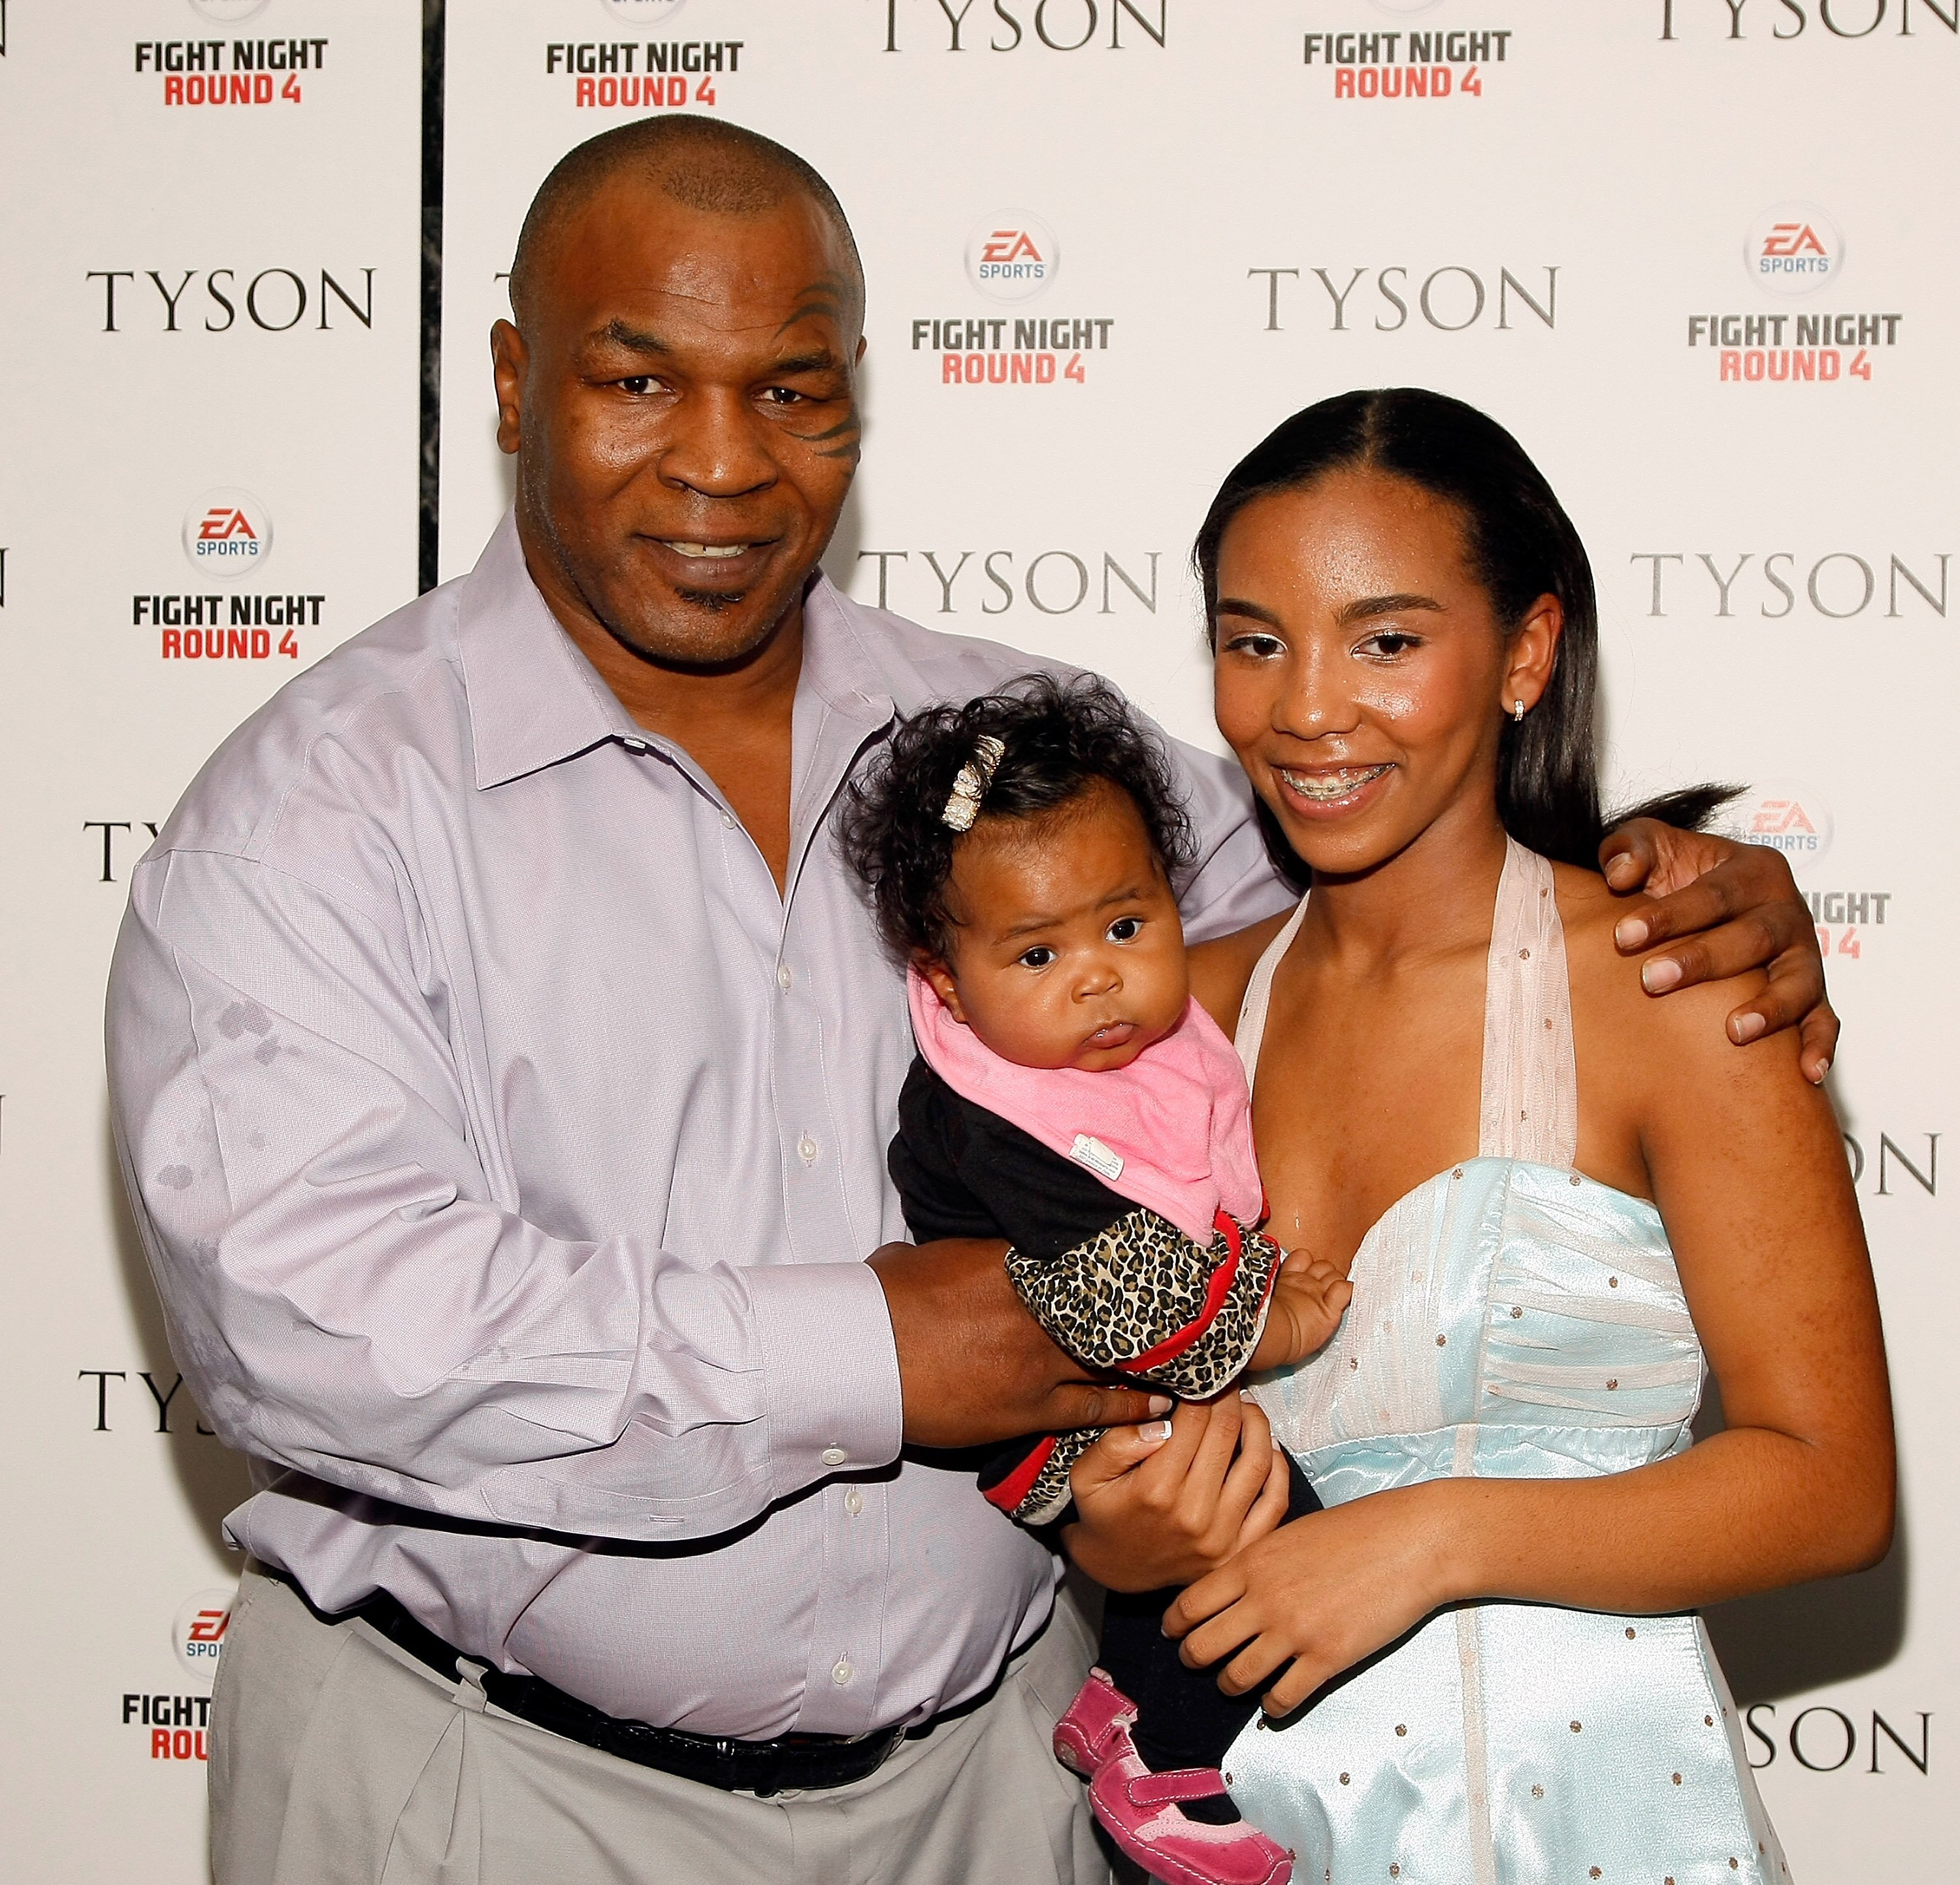 Former Heavy Weight Champion Boxer Mike Tyson, Ramsey (right) and his youngest daughter attend a screening of 